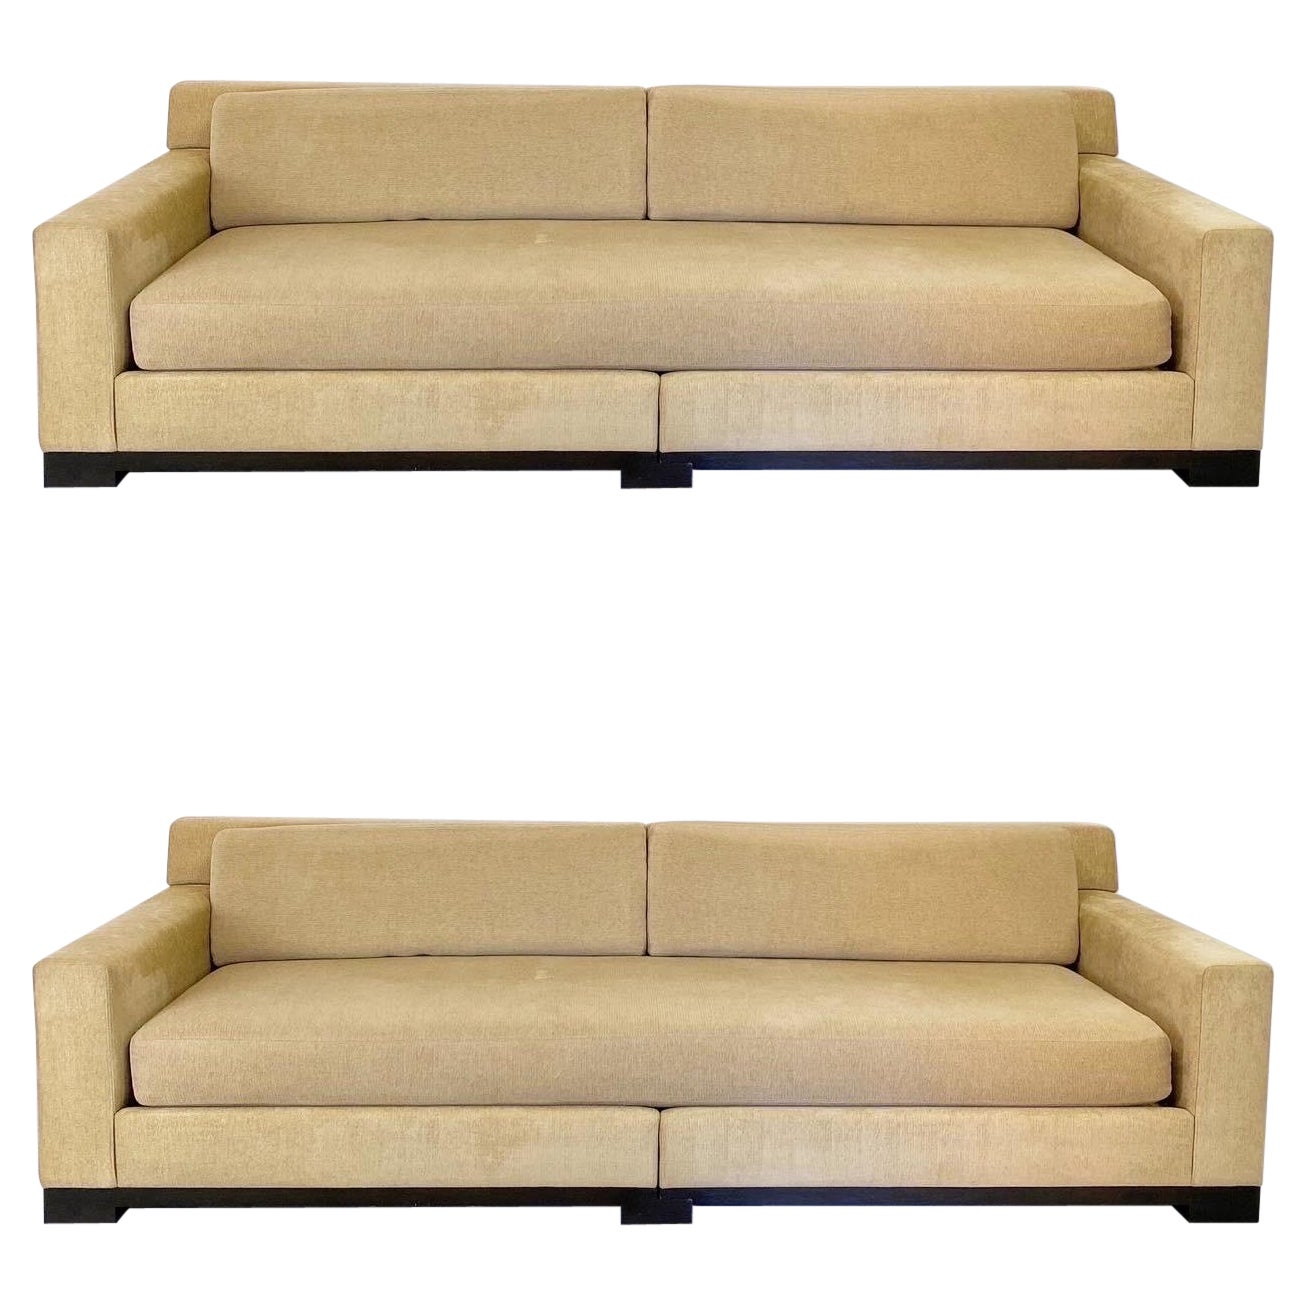 Christian Liaigre Sofa by Holly Hunt, Pair Available